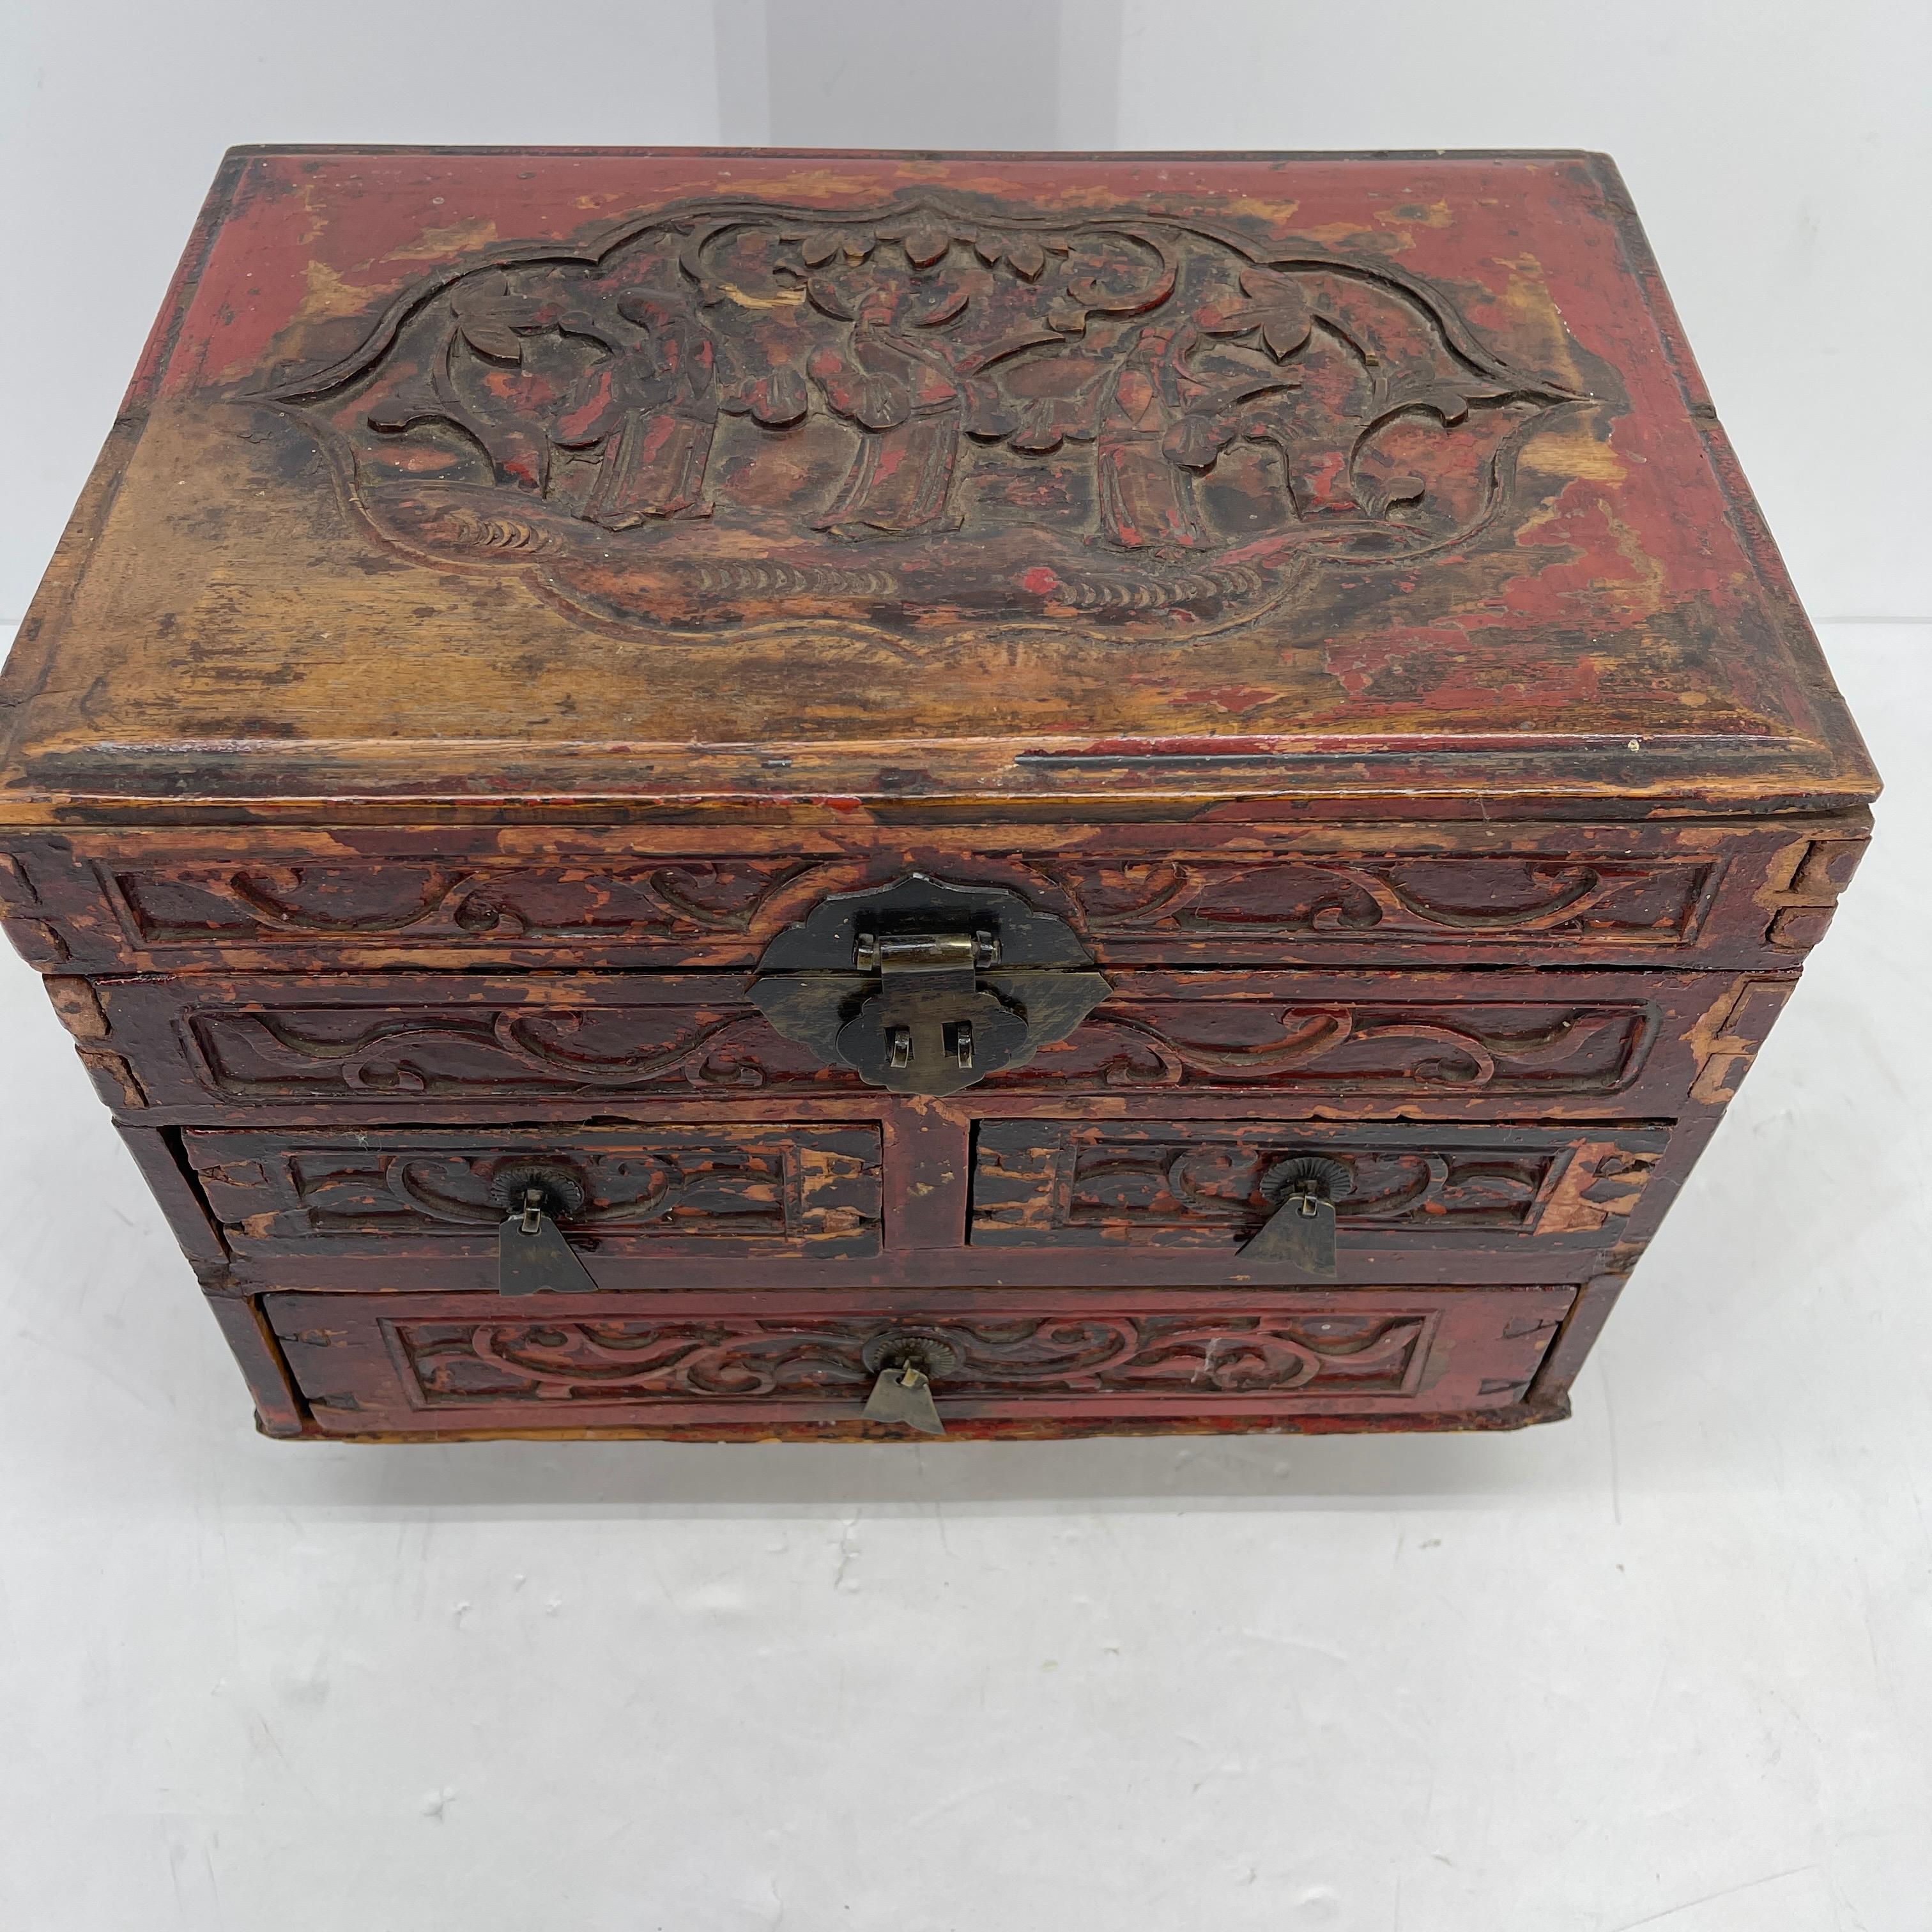 Antique Early 20th Century carved red brown lacquered wood and iron hardware jewelry box. This small Chinese rectangular box features a large bottom drawer, two smaller ones and a hinged lid. Having hidden wood locks inside to open and close all